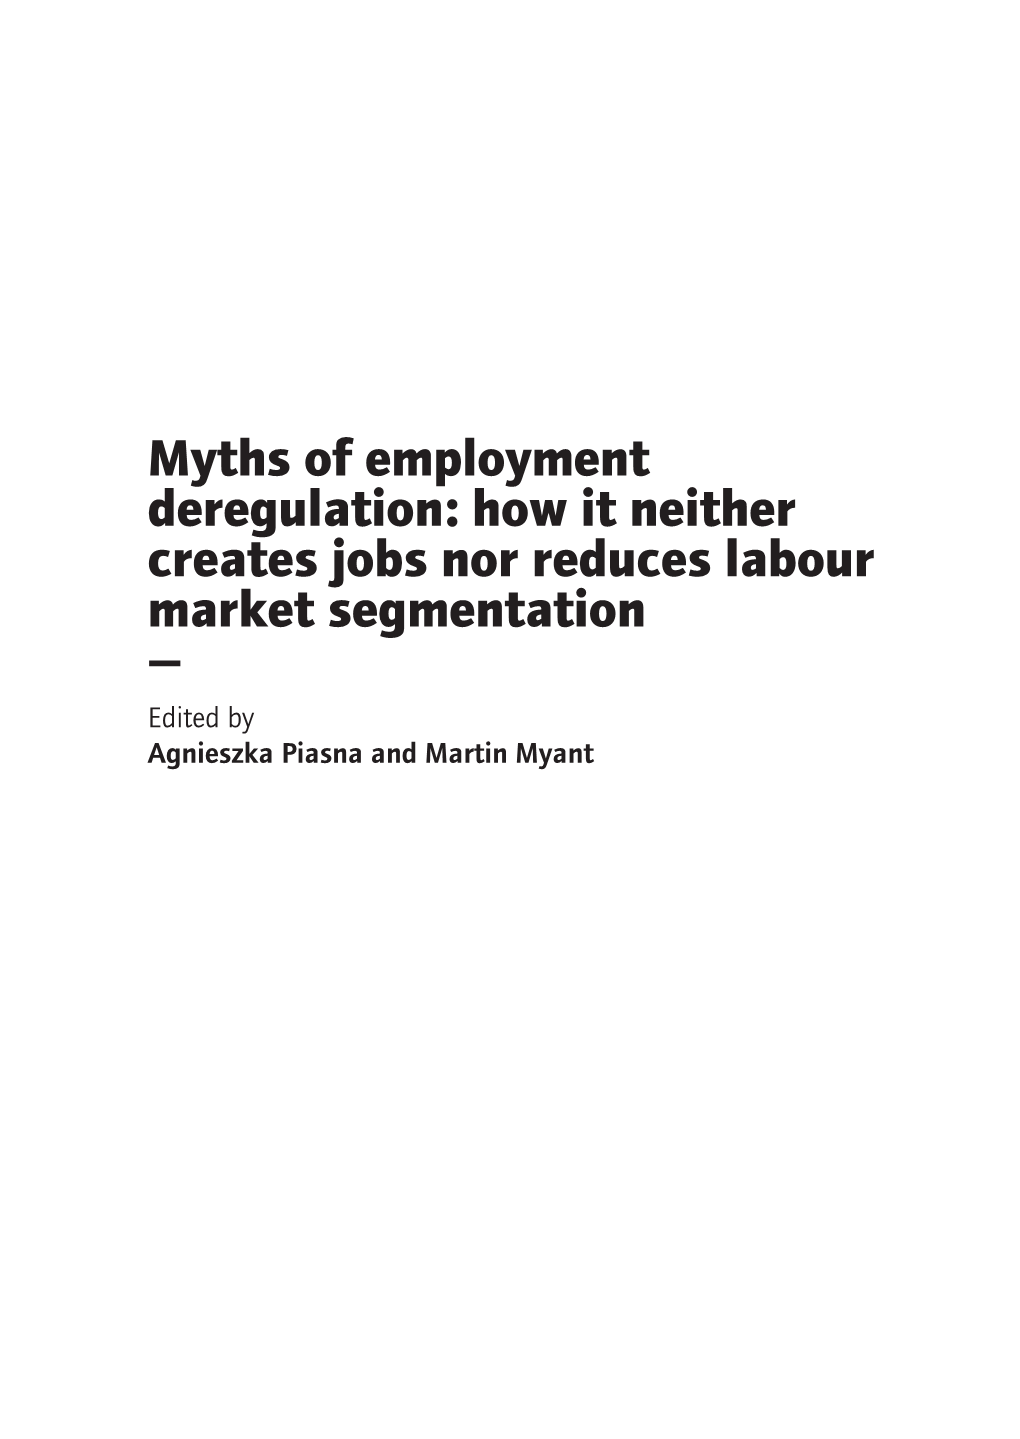 How It Neither Creates Jobs Nor Reduces Labour Market Segmentation — Edited by Agnieszka Piasna and Martin Myant Introduction